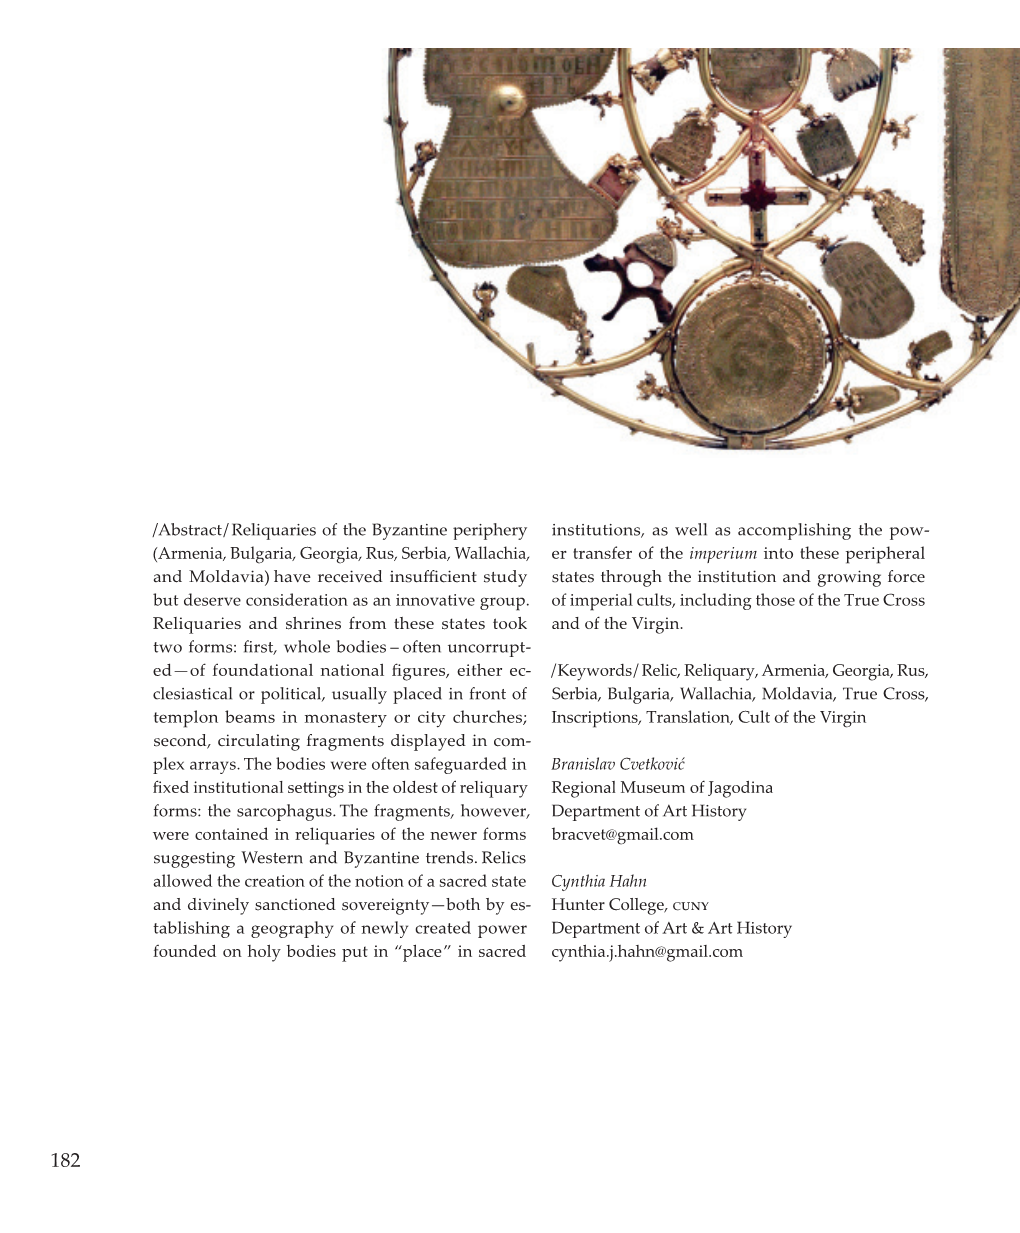 Abstract / Reliquaries of the Byzantine Periphery